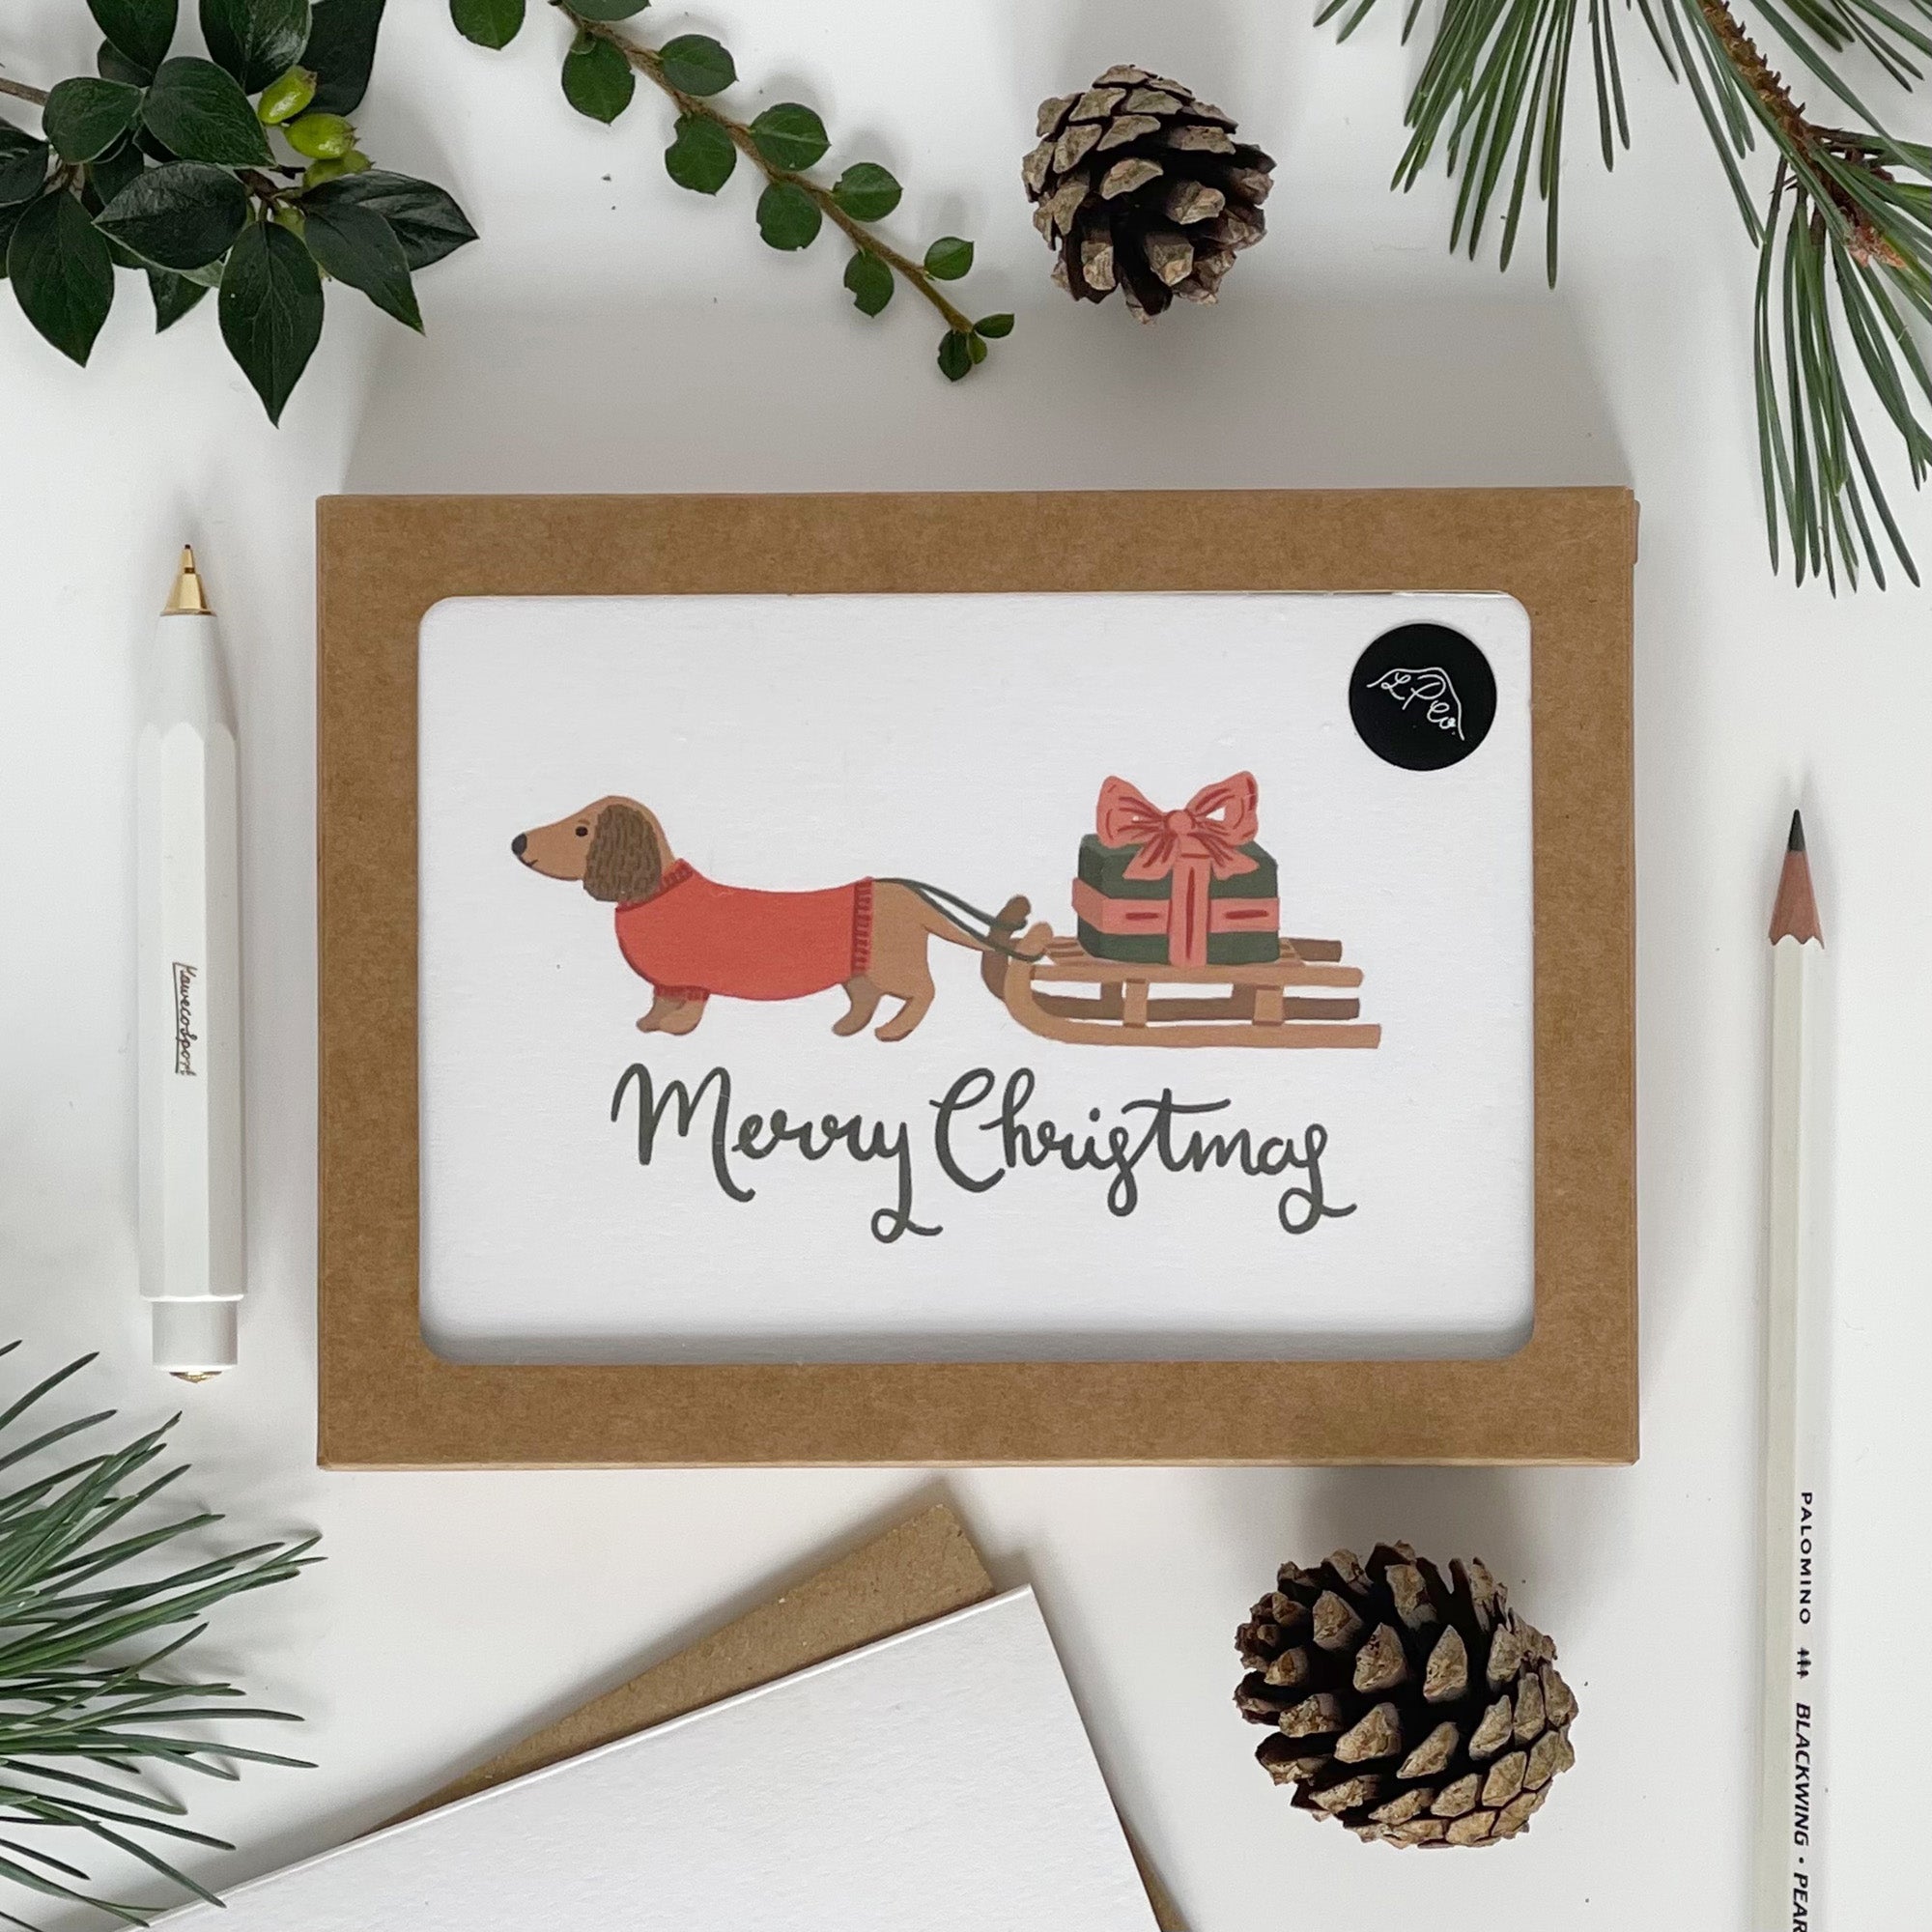 Dachshund pulling a Sledge Merry Christmas Card Pack